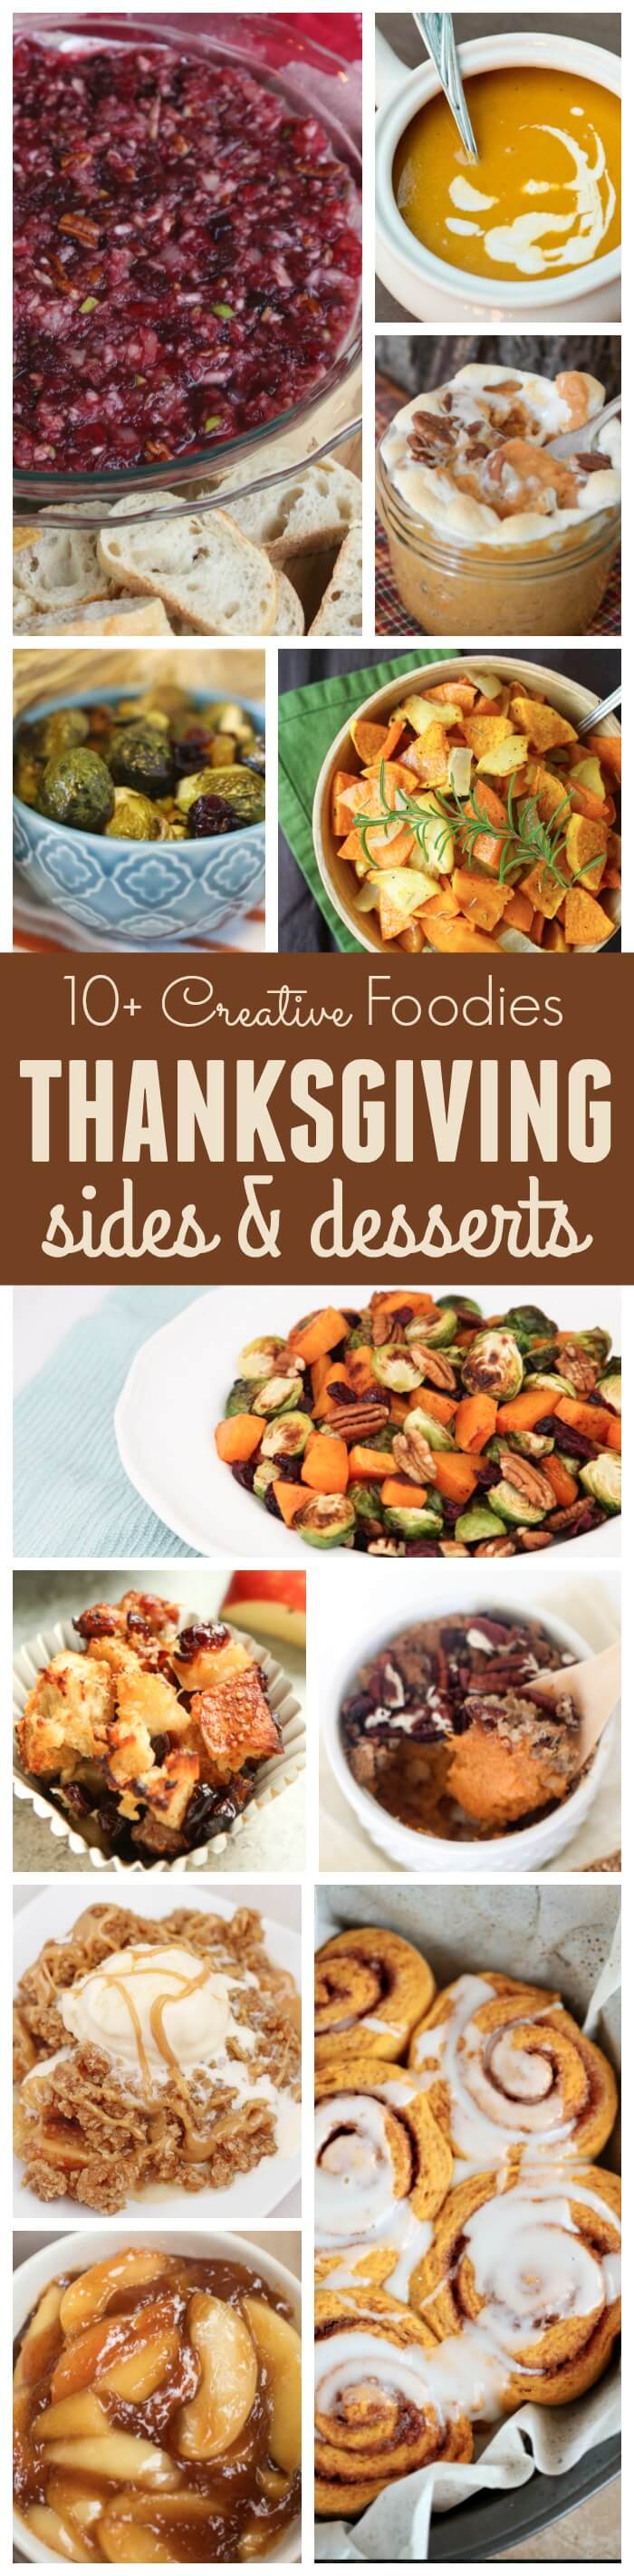 10 creative foodies thanksgiving sides and desserts